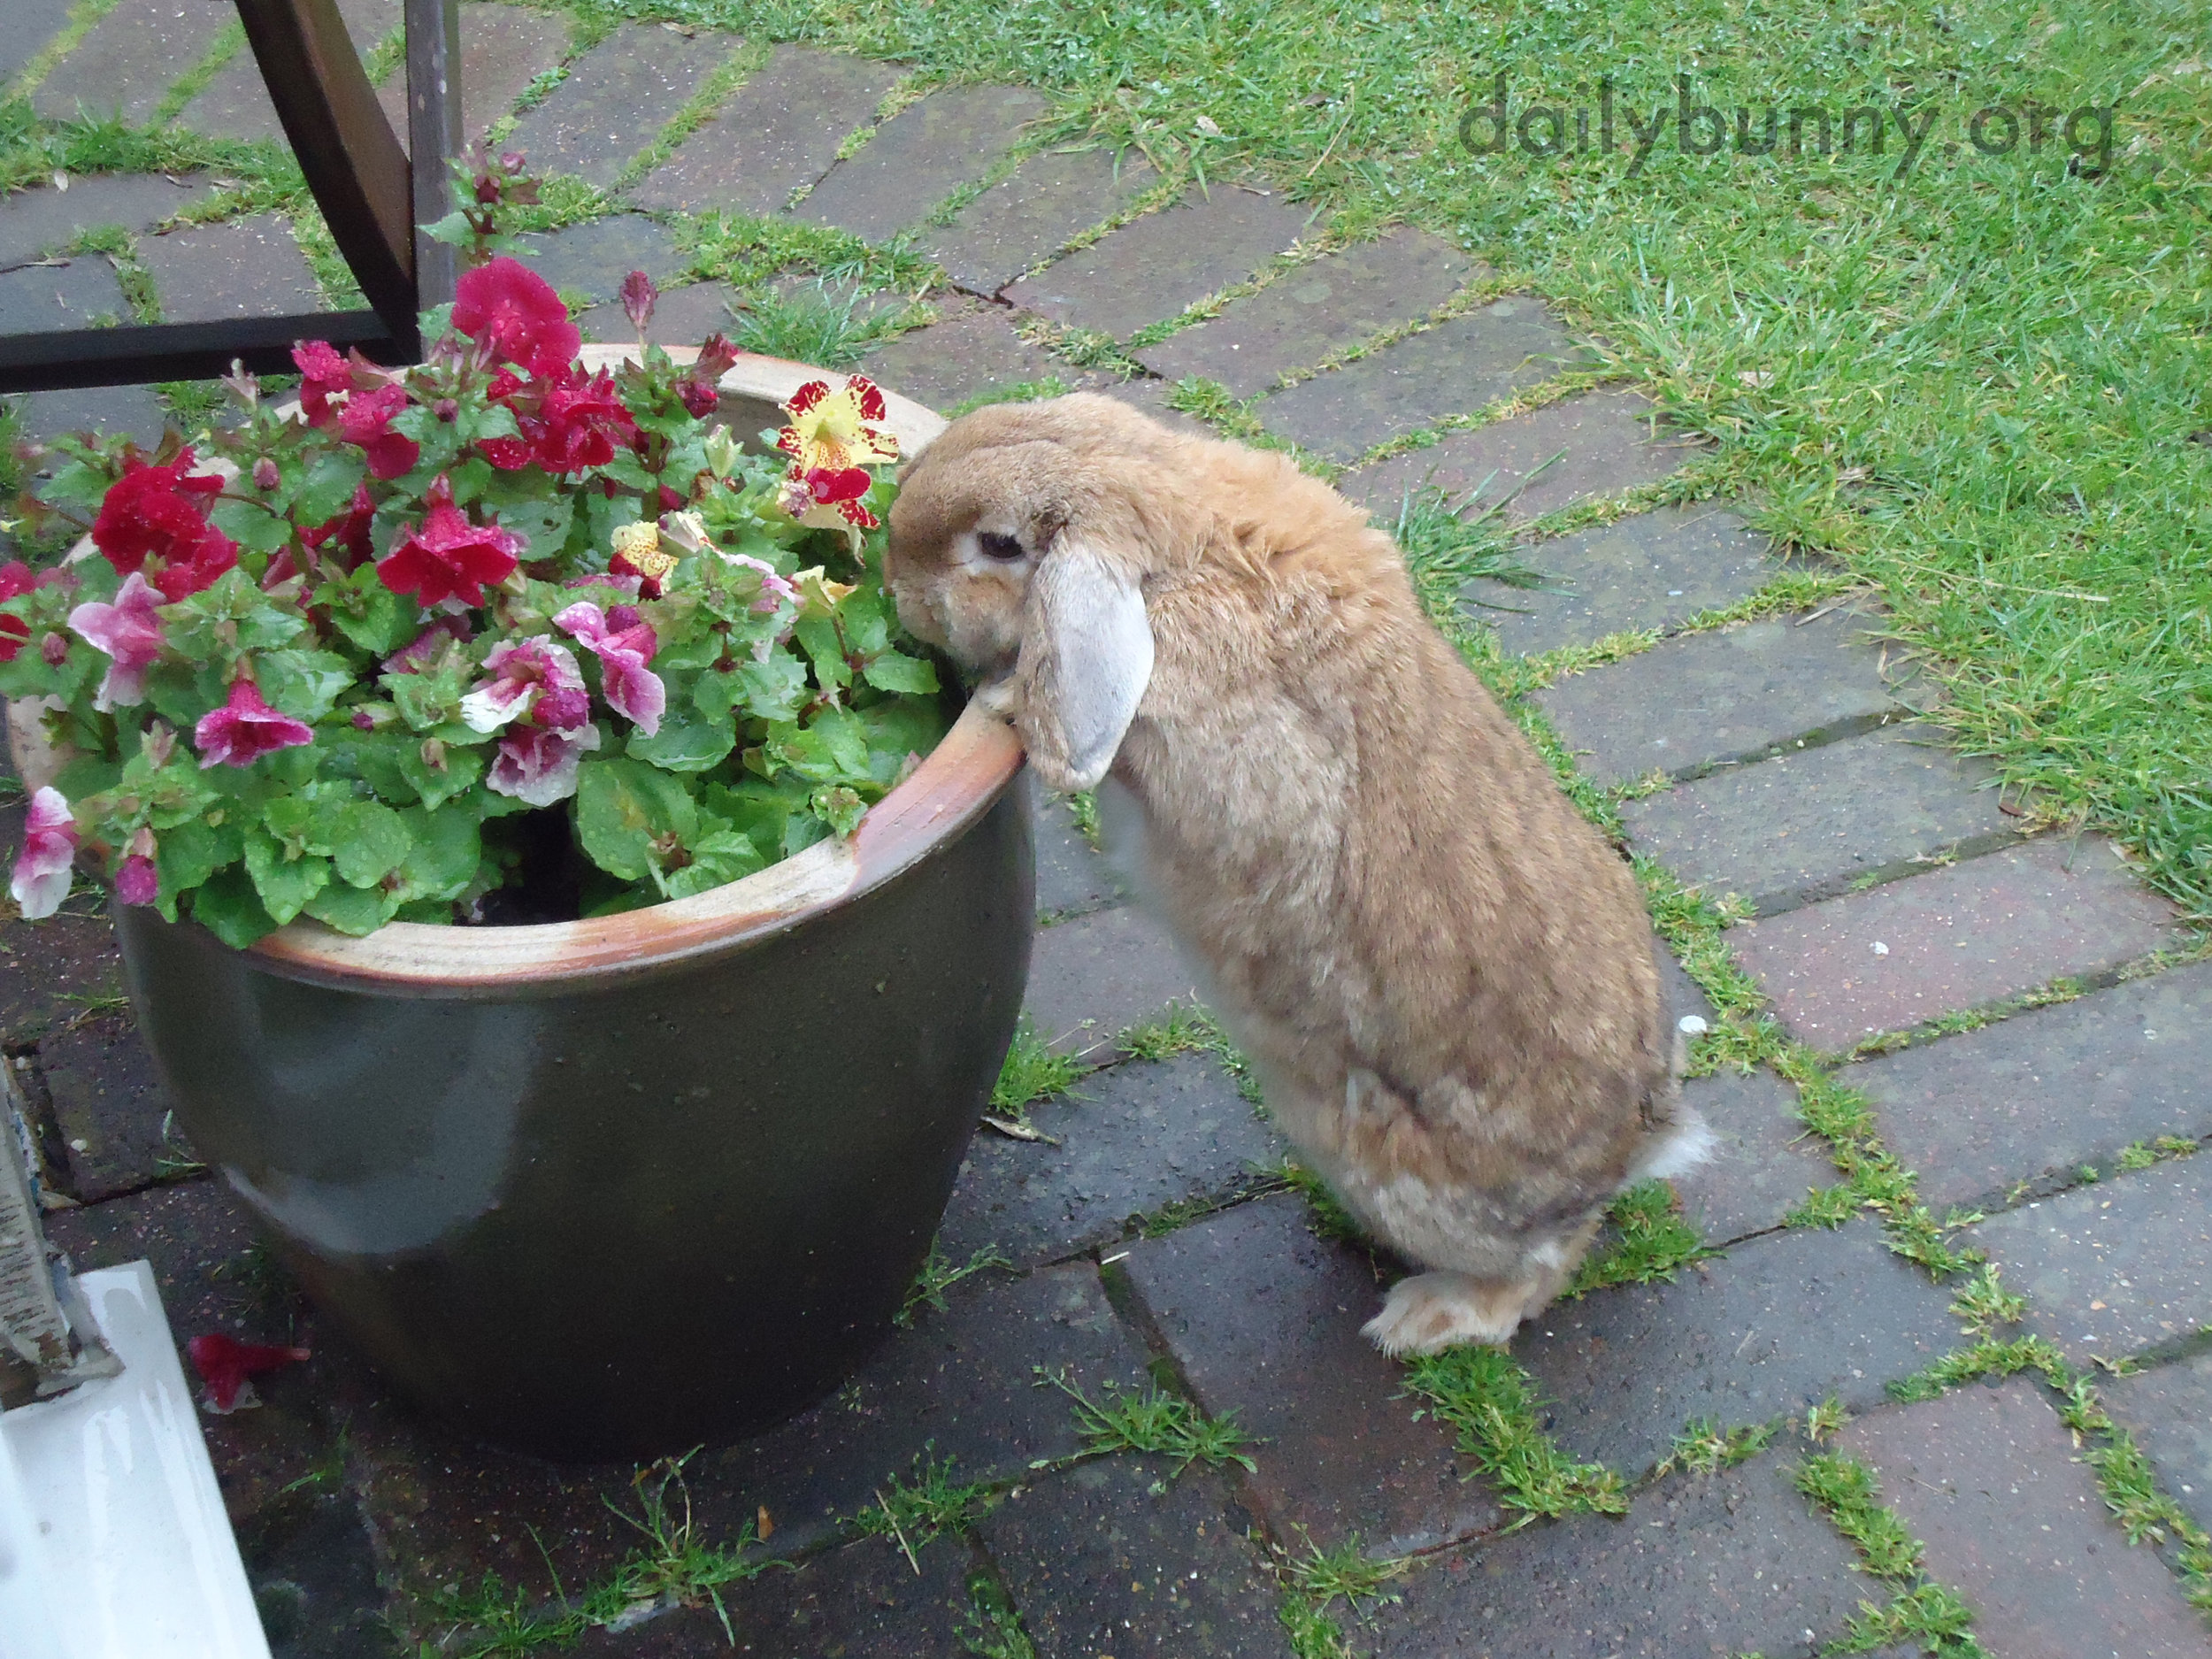 Bunny Has Found the Flowers and Will Help Herself 2